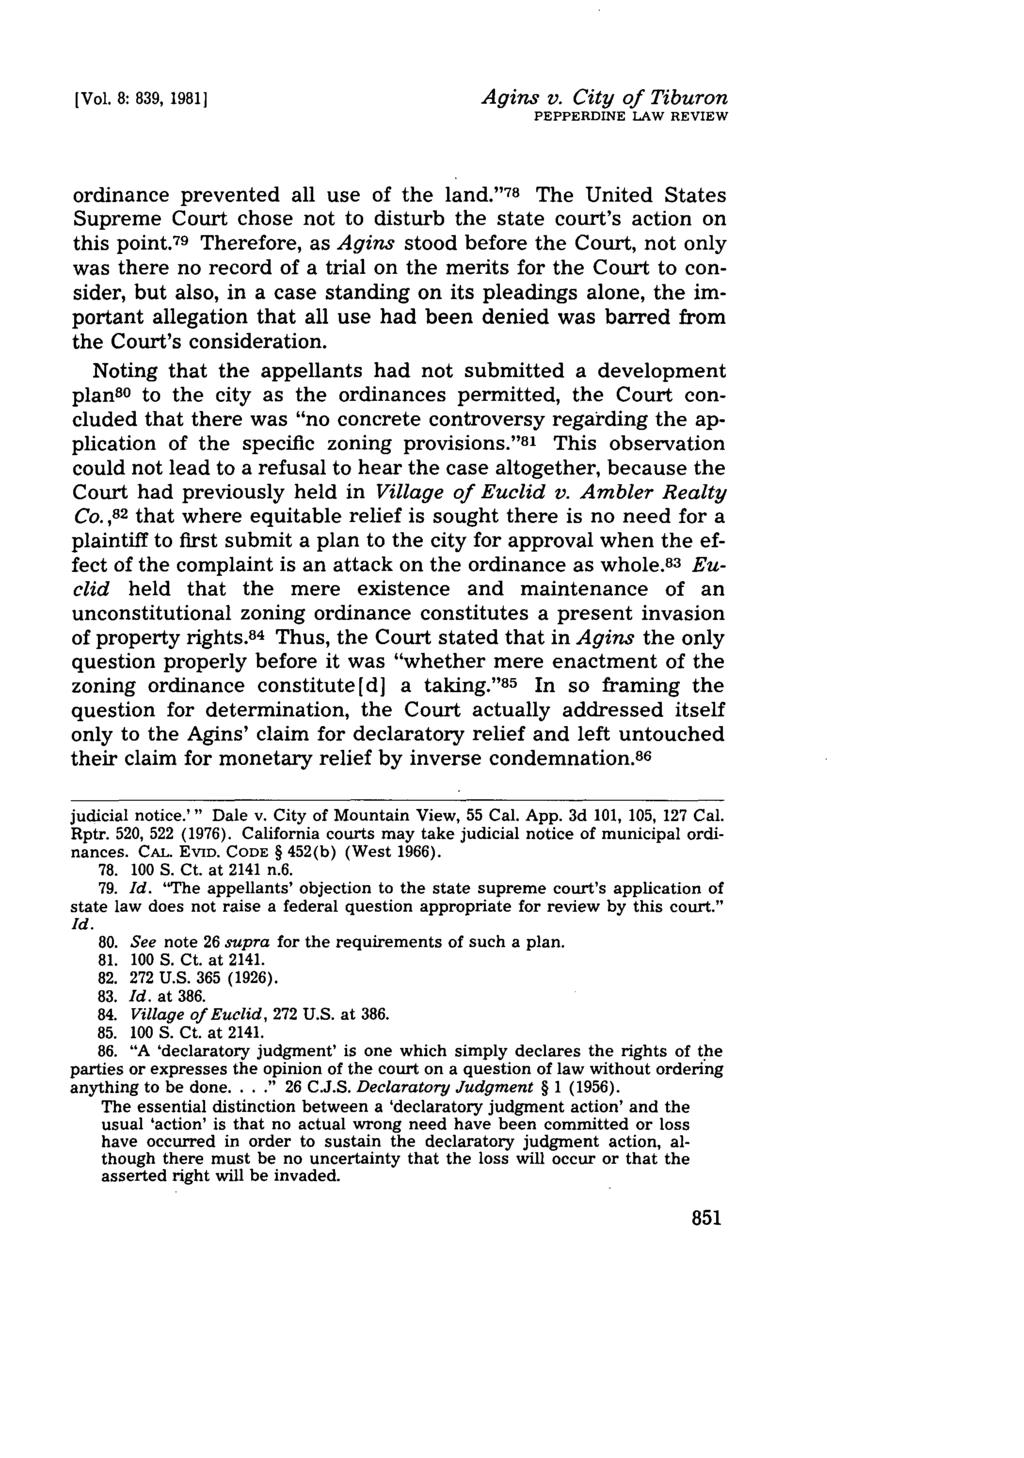 [Vol. 8: 839, 1981] Agins v. City of Tiburon PEPPERDINE LAW REVIEW ordinance prevented all use of the land.